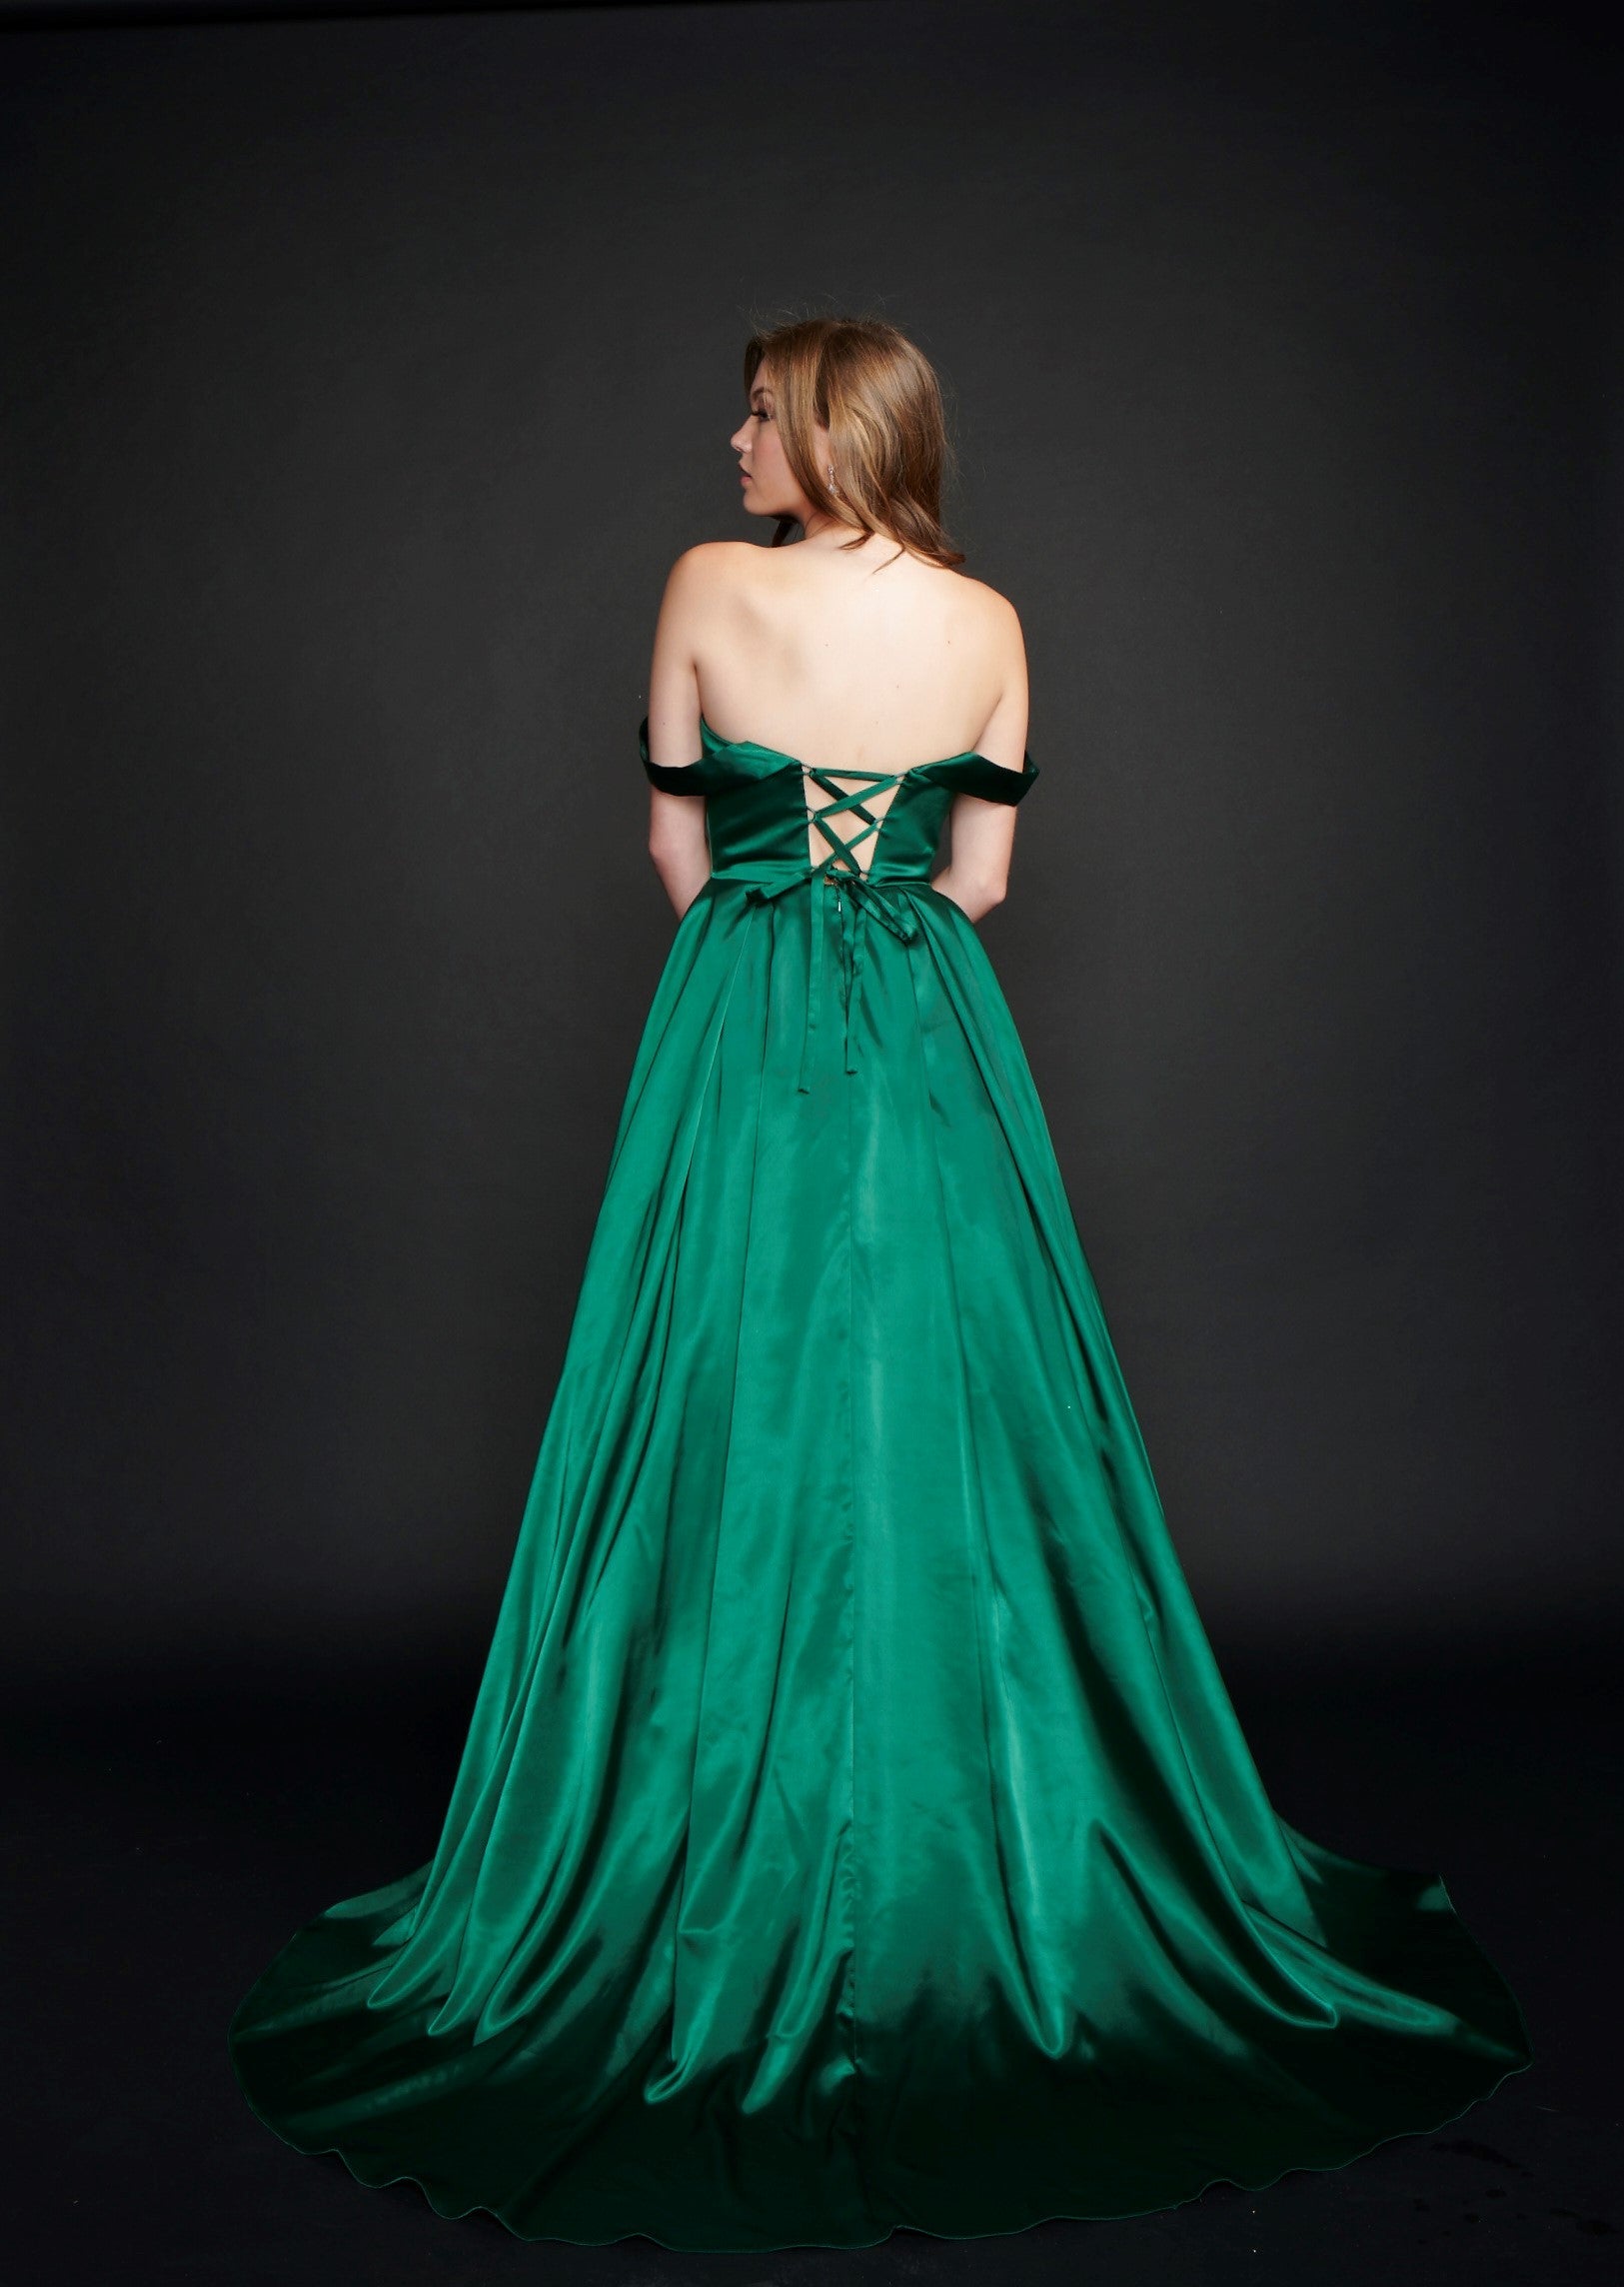 Nina Canacci 5214 Long Satin off the shoulder Ballgown Prom Dress Pageant Gown Pockets  Available Size- 4-24  Available Color-Red, Emerald 